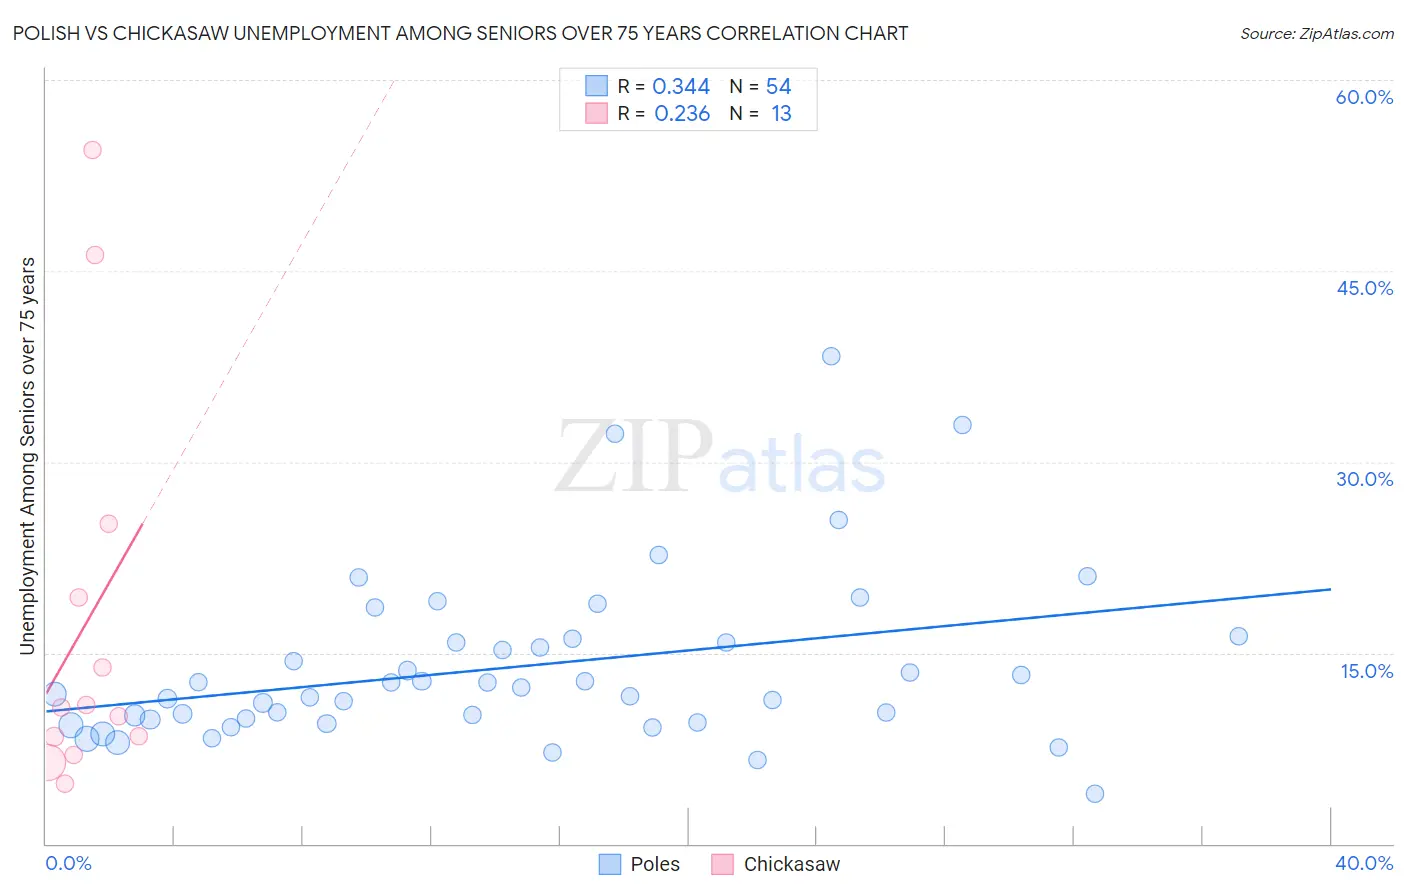 Polish vs Chickasaw Unemployment Among Seniors over 75 years